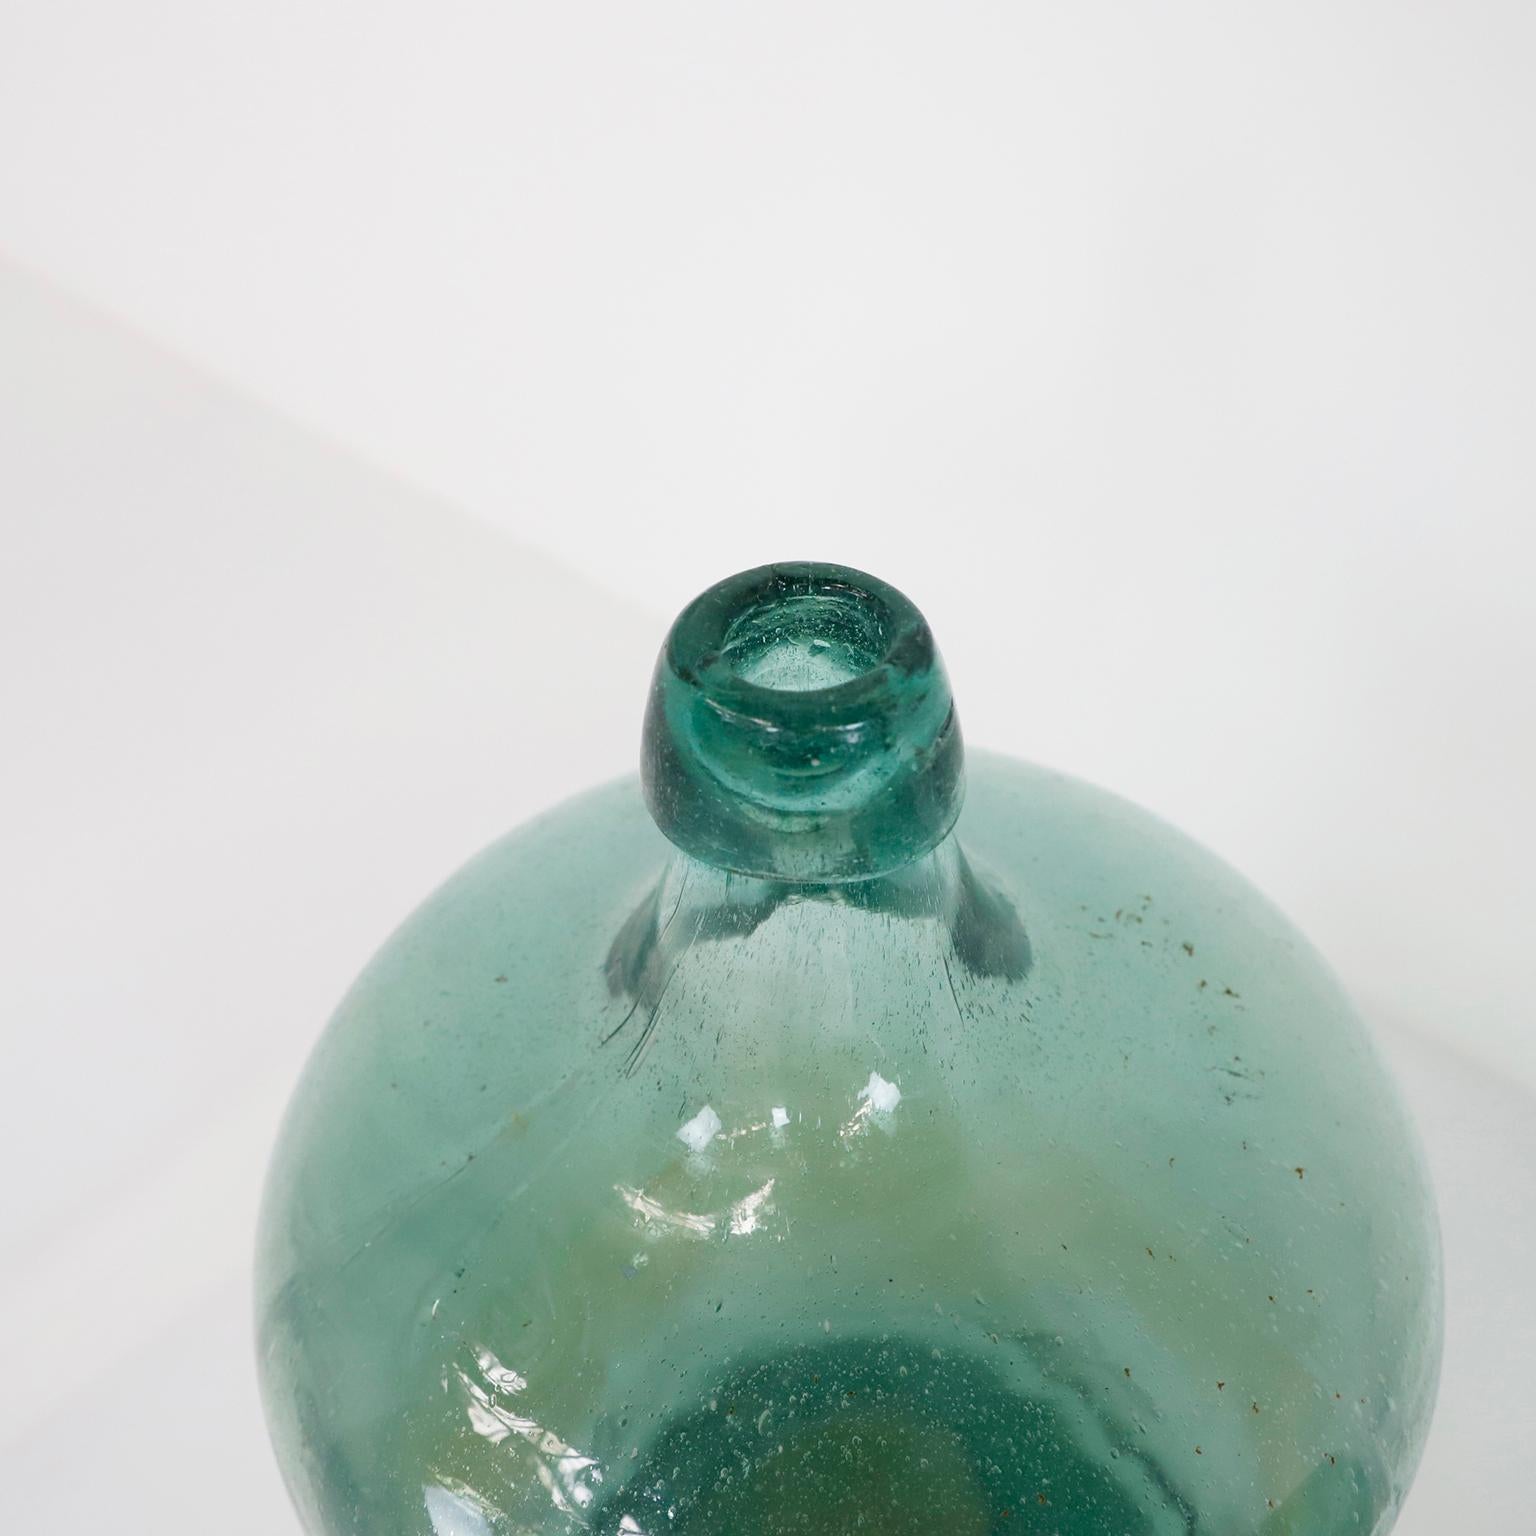 Circa 1940, we offer this pair of antique handmade water bottles.